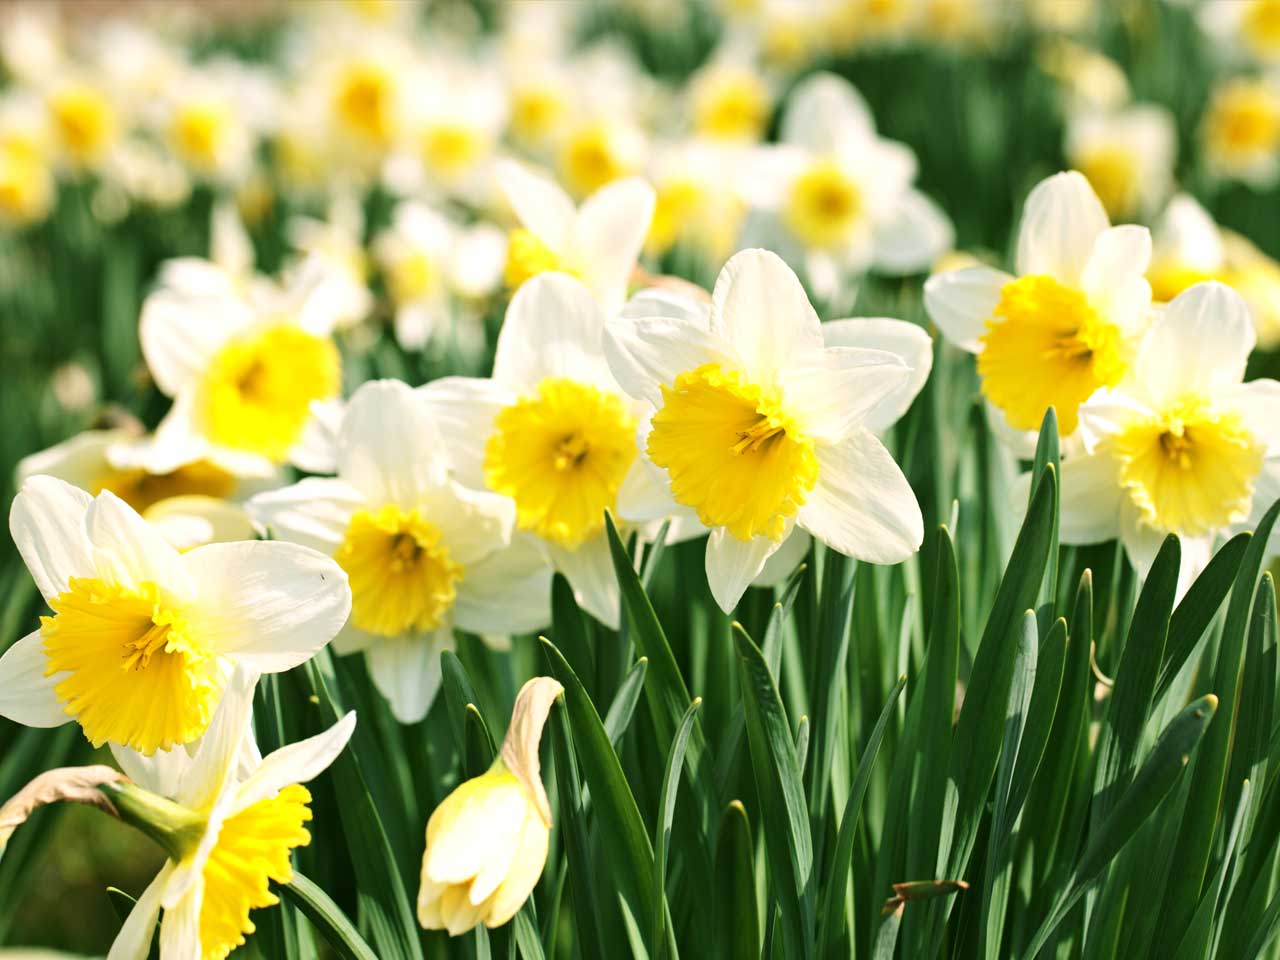 Are Daffodils the key to beating cancer?